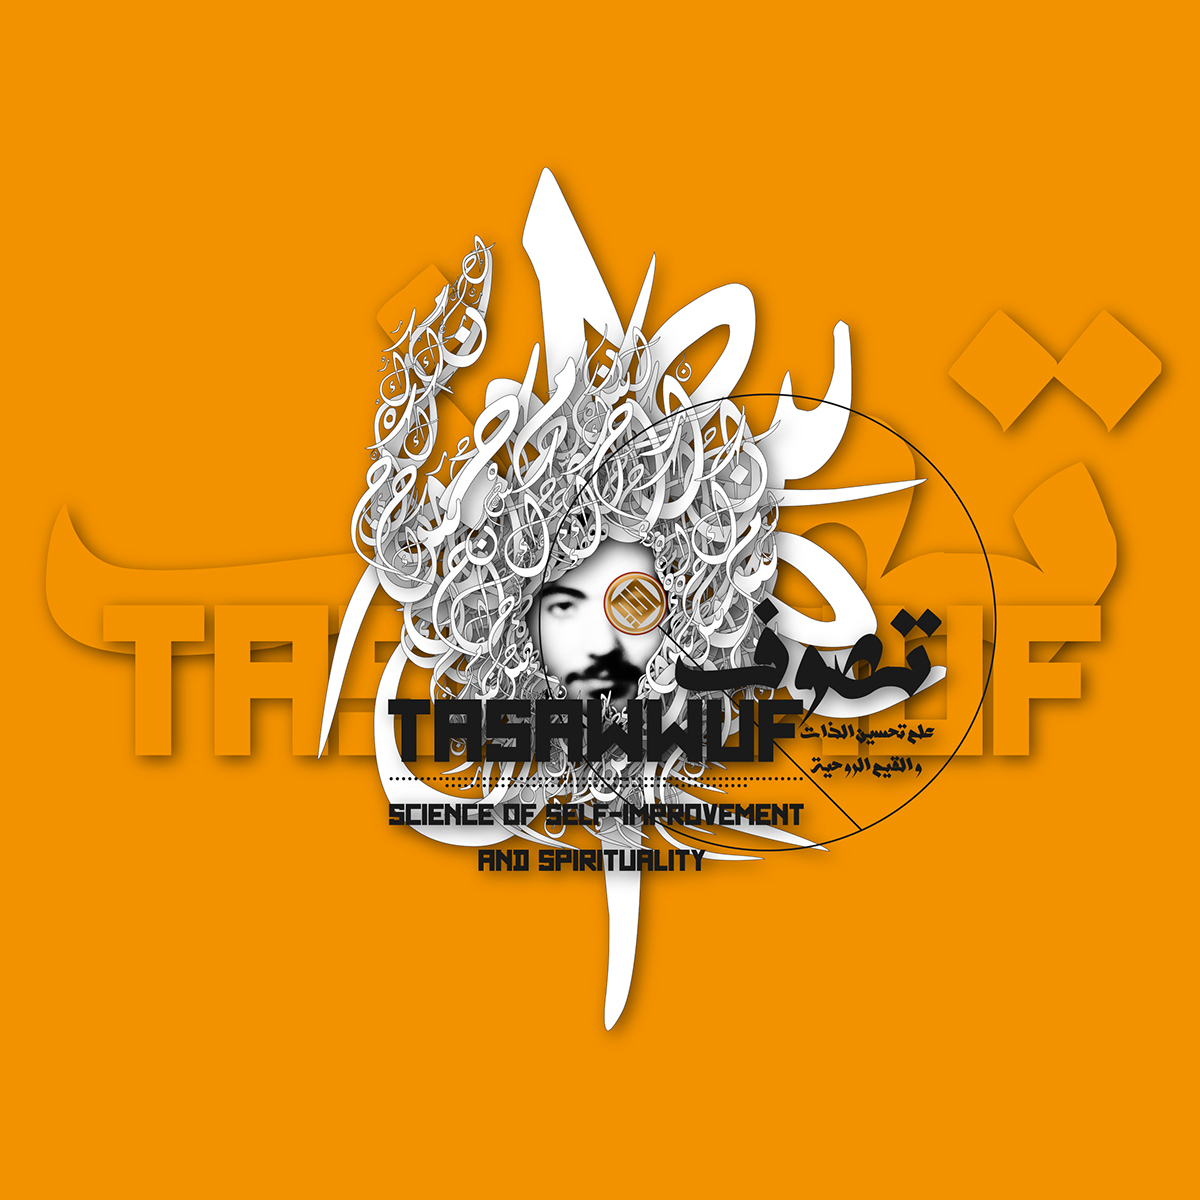 Aly bchennaty  Sufism Calligraphy   graphic design  arabic graphics  arabic graphic designs soul beirut graphics 